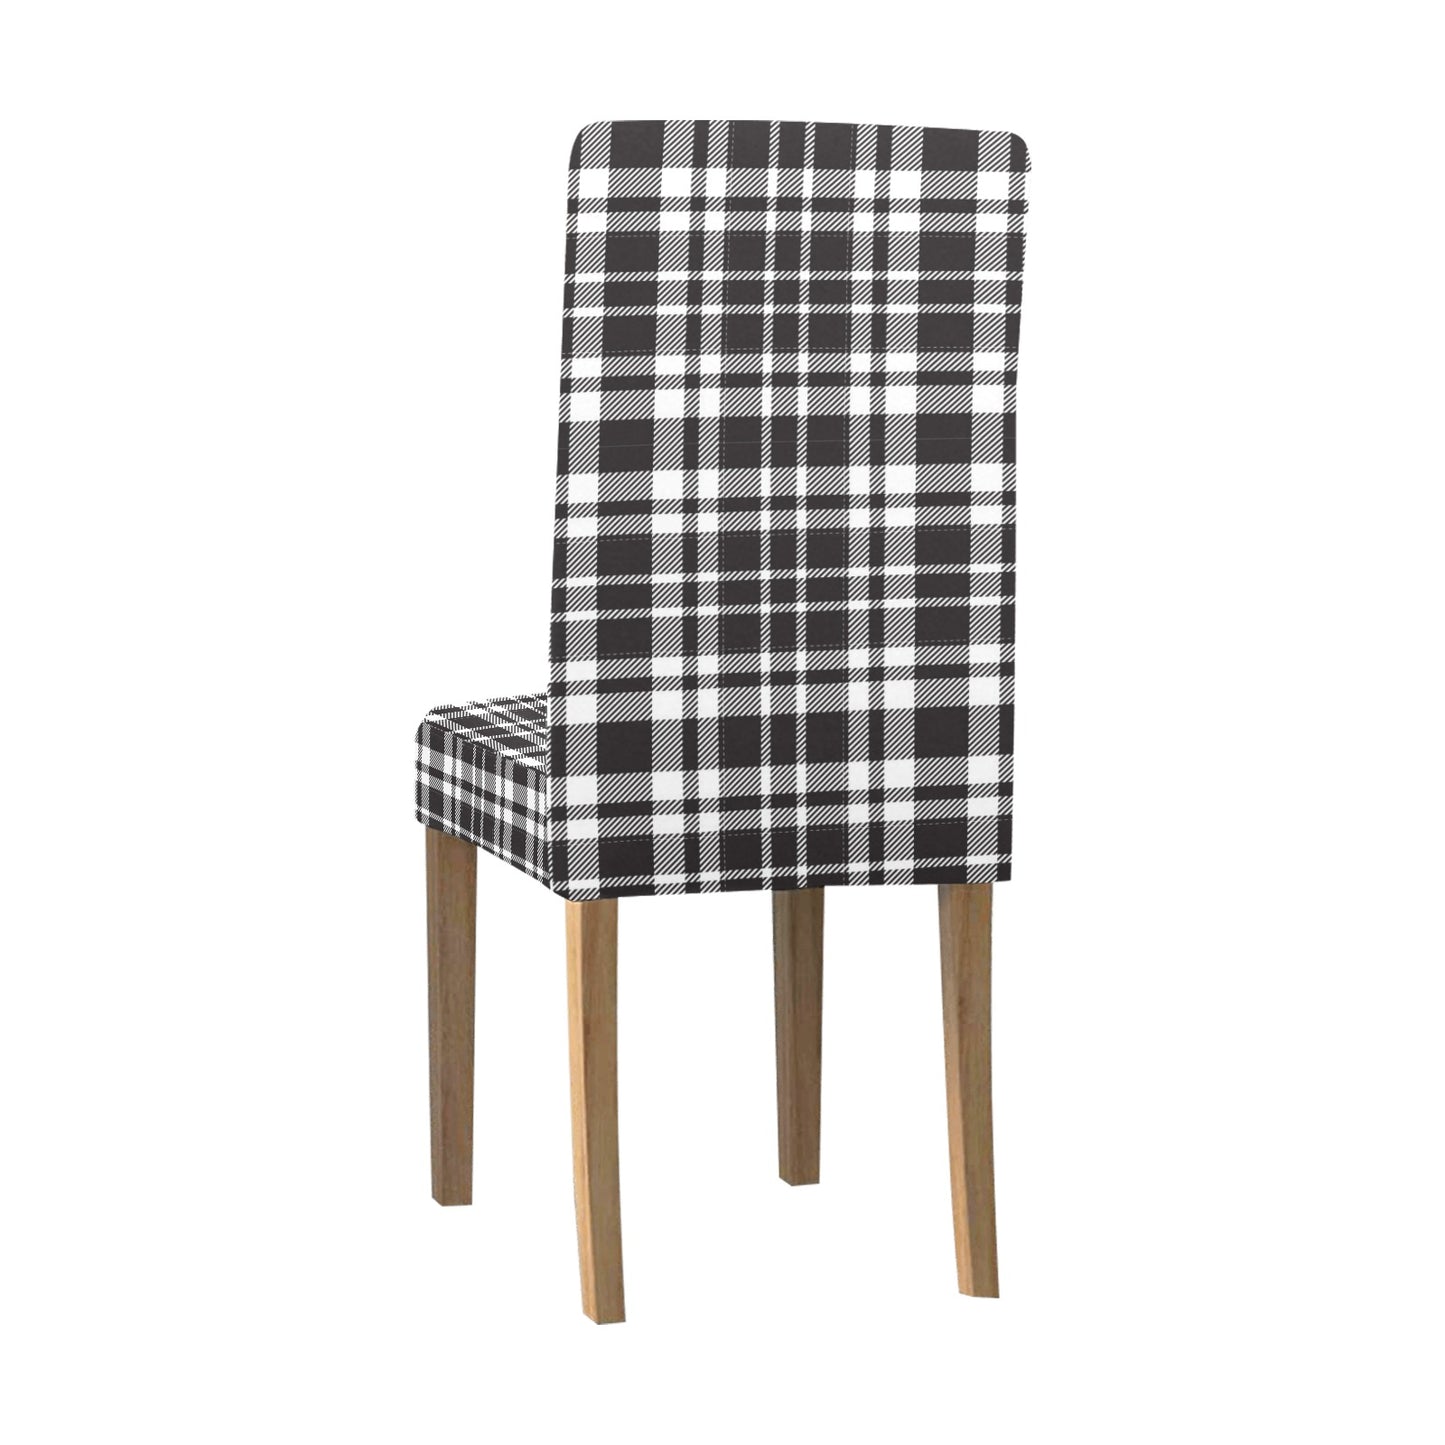 Buffalo Check Dining Chair Seat Covers, Black White Check Plaid Stretch Slipcover Furniture Dining Room Home Decor Starcove Fashion